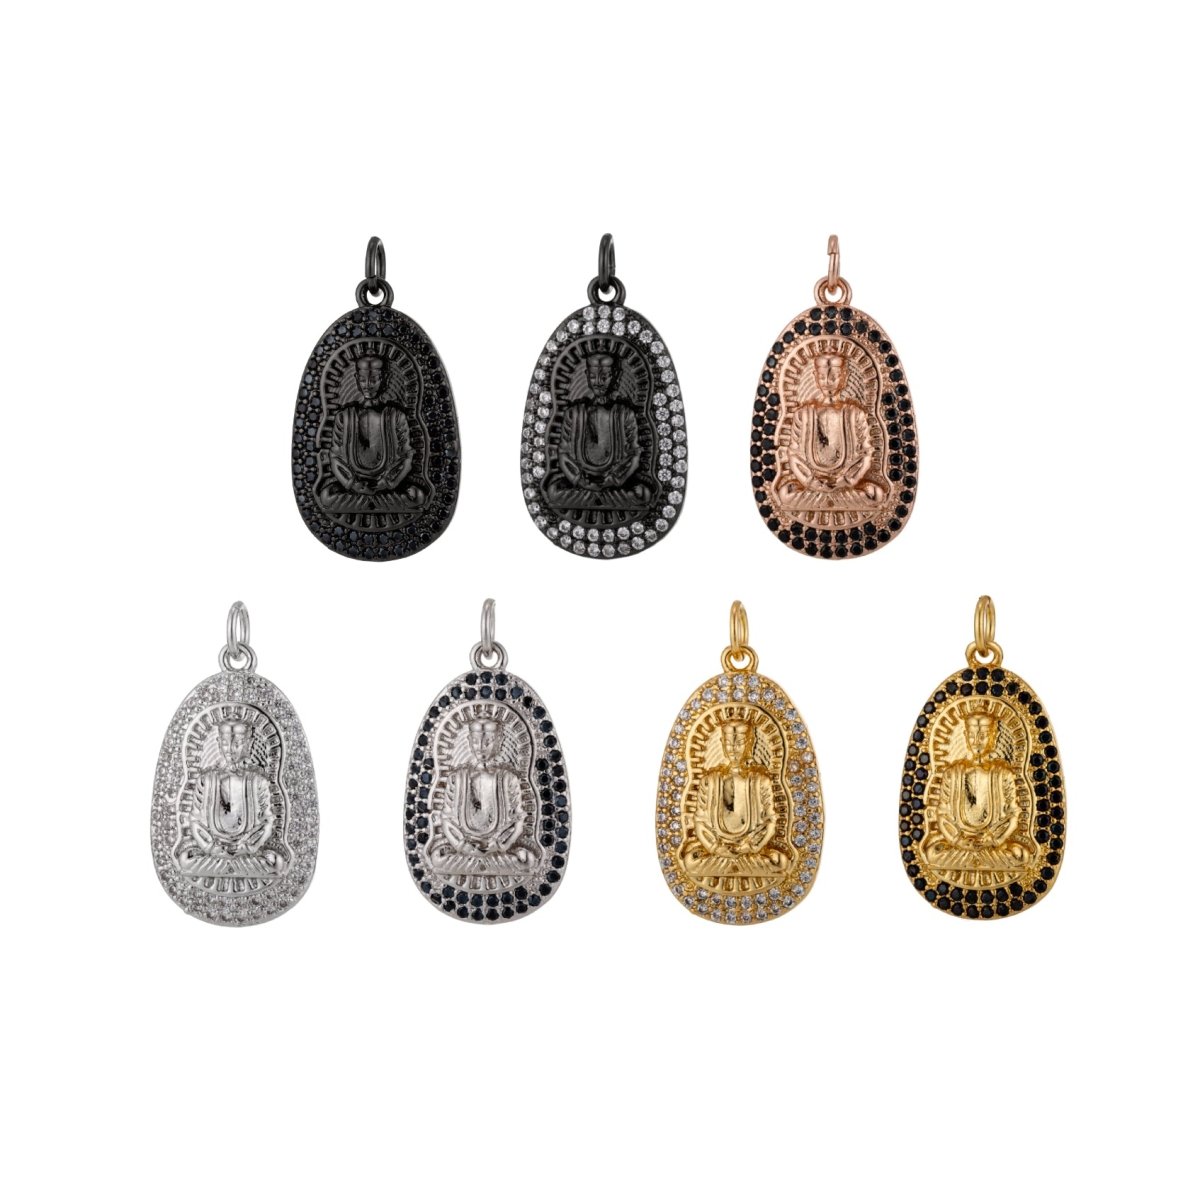 Gold Filled Buddha, Buddhist Religious Zen Enlightenment, DIY Cubic Zirconia Necklace Pendant Charm Bead Bails for Jewelry Making | | C-441, M-336, M-337 - DLUXCA